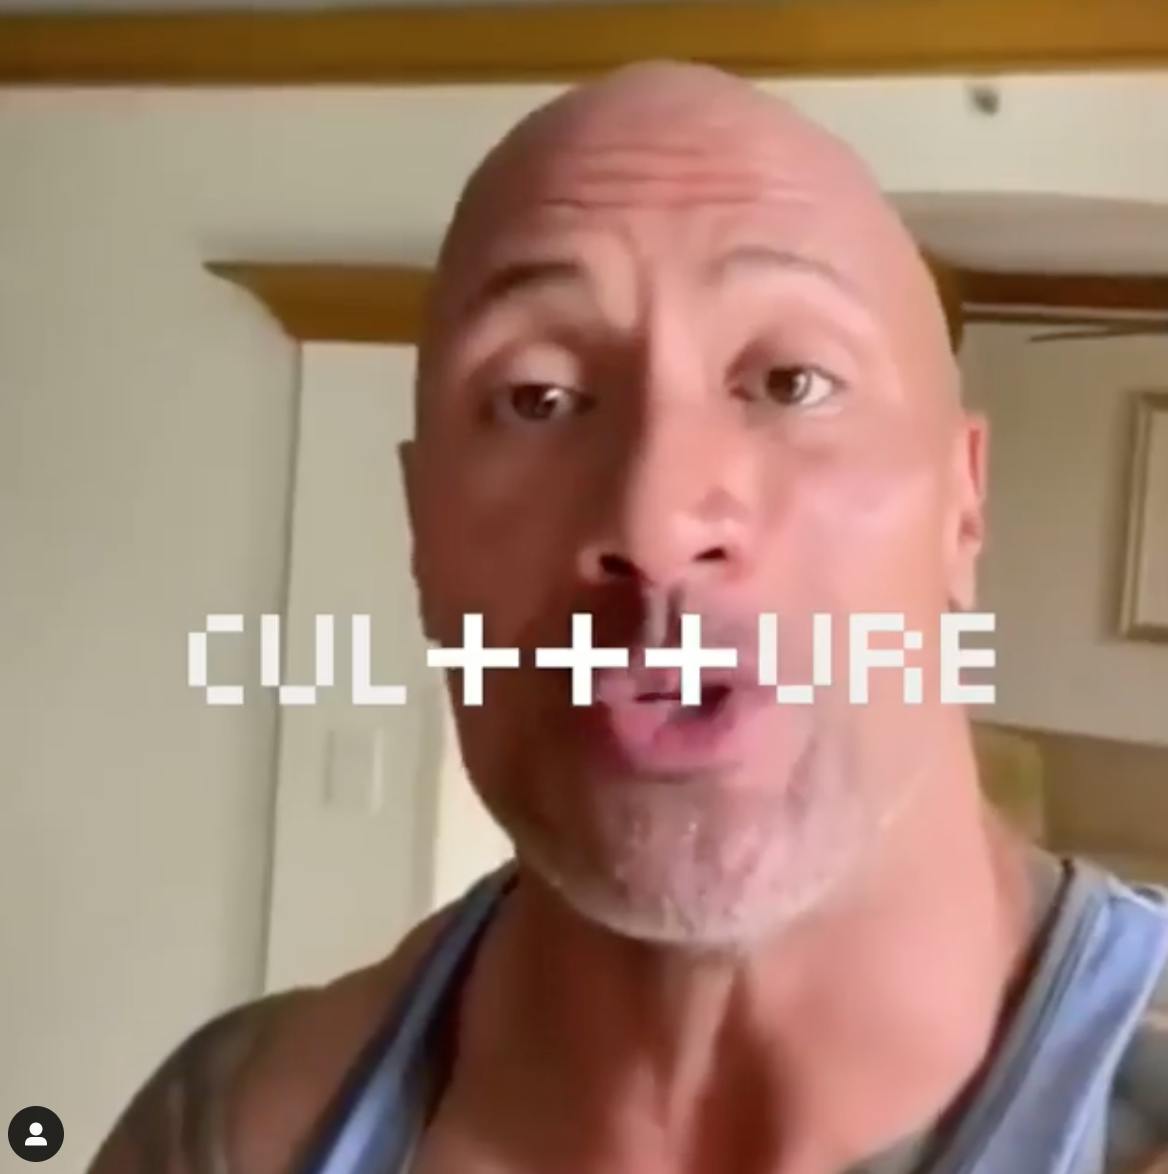 the rock culttture